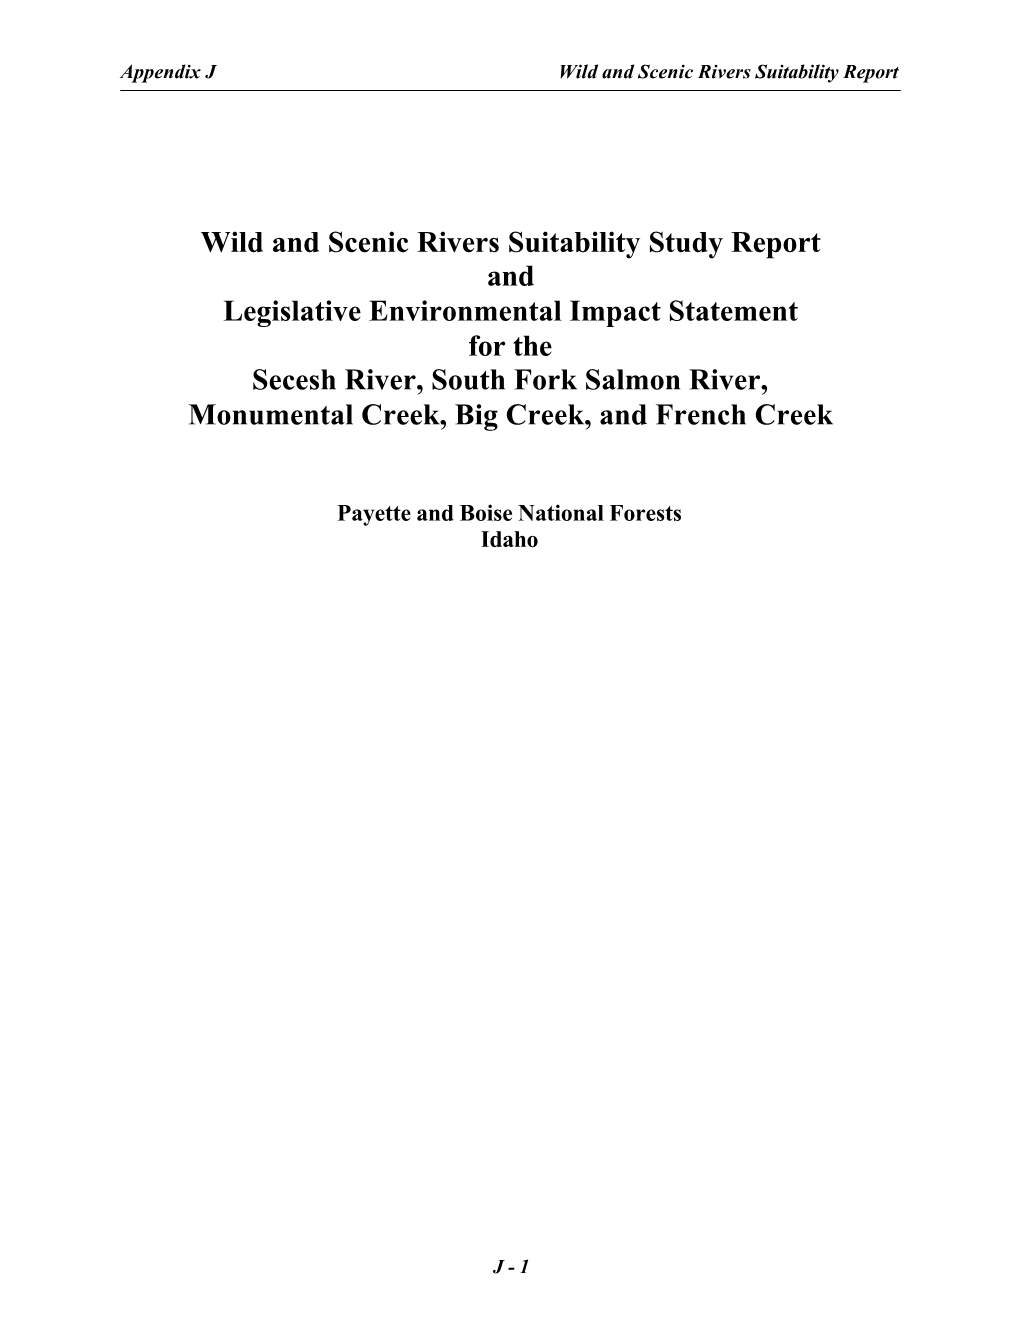 Wild and Scenic Rivers Suitability Study Report and Legislative